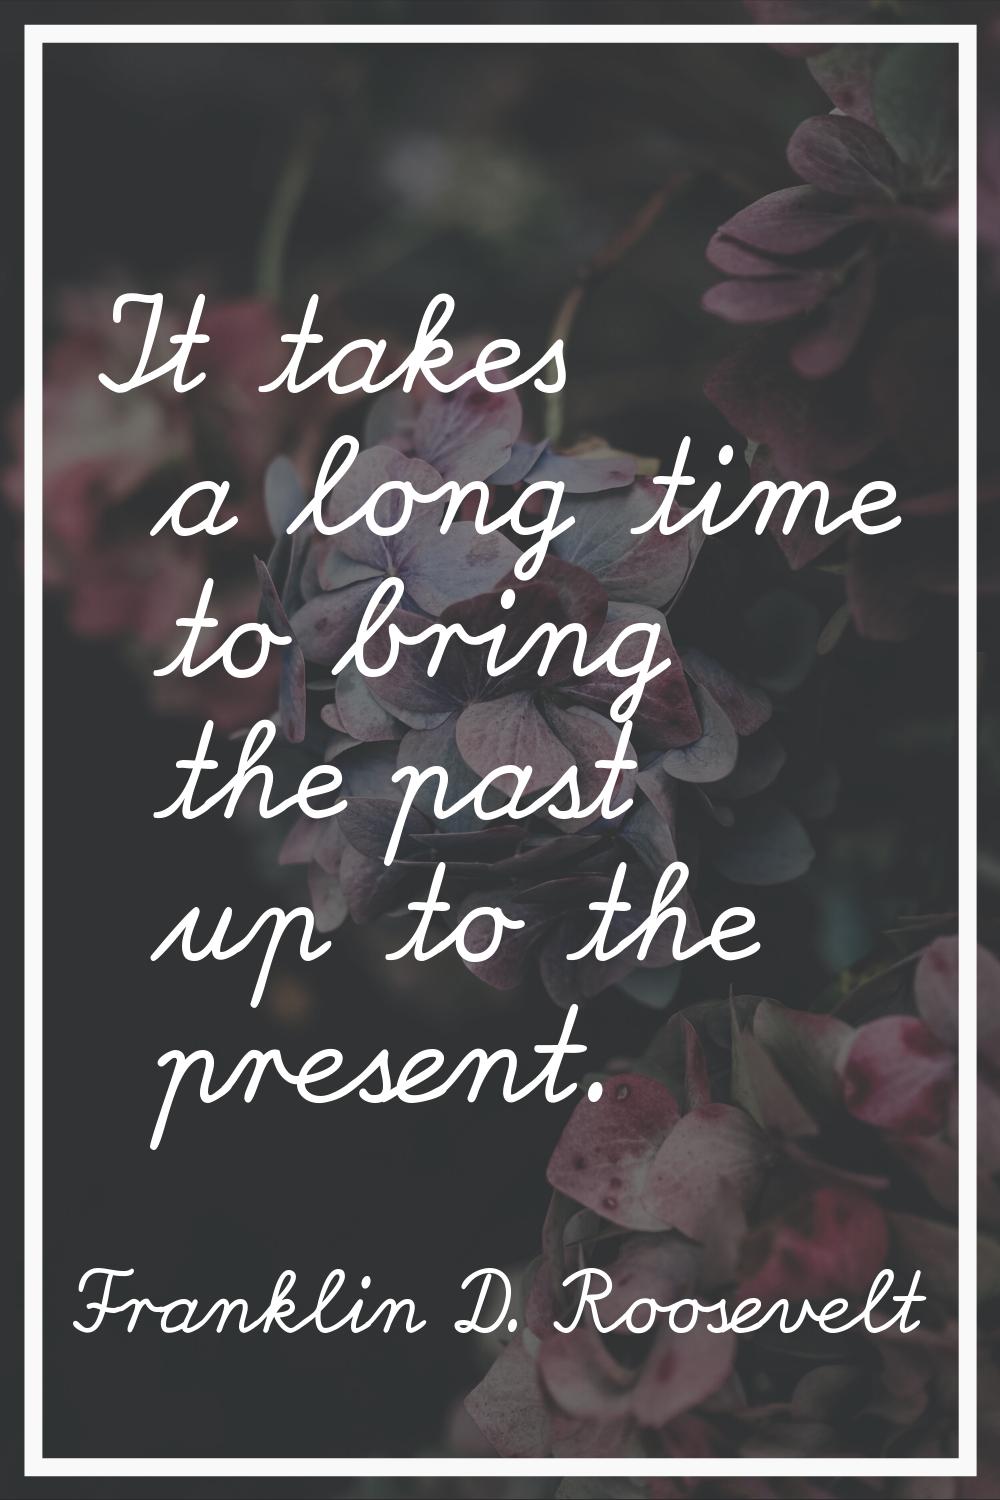 It takes a long time to bring the past up to the present.